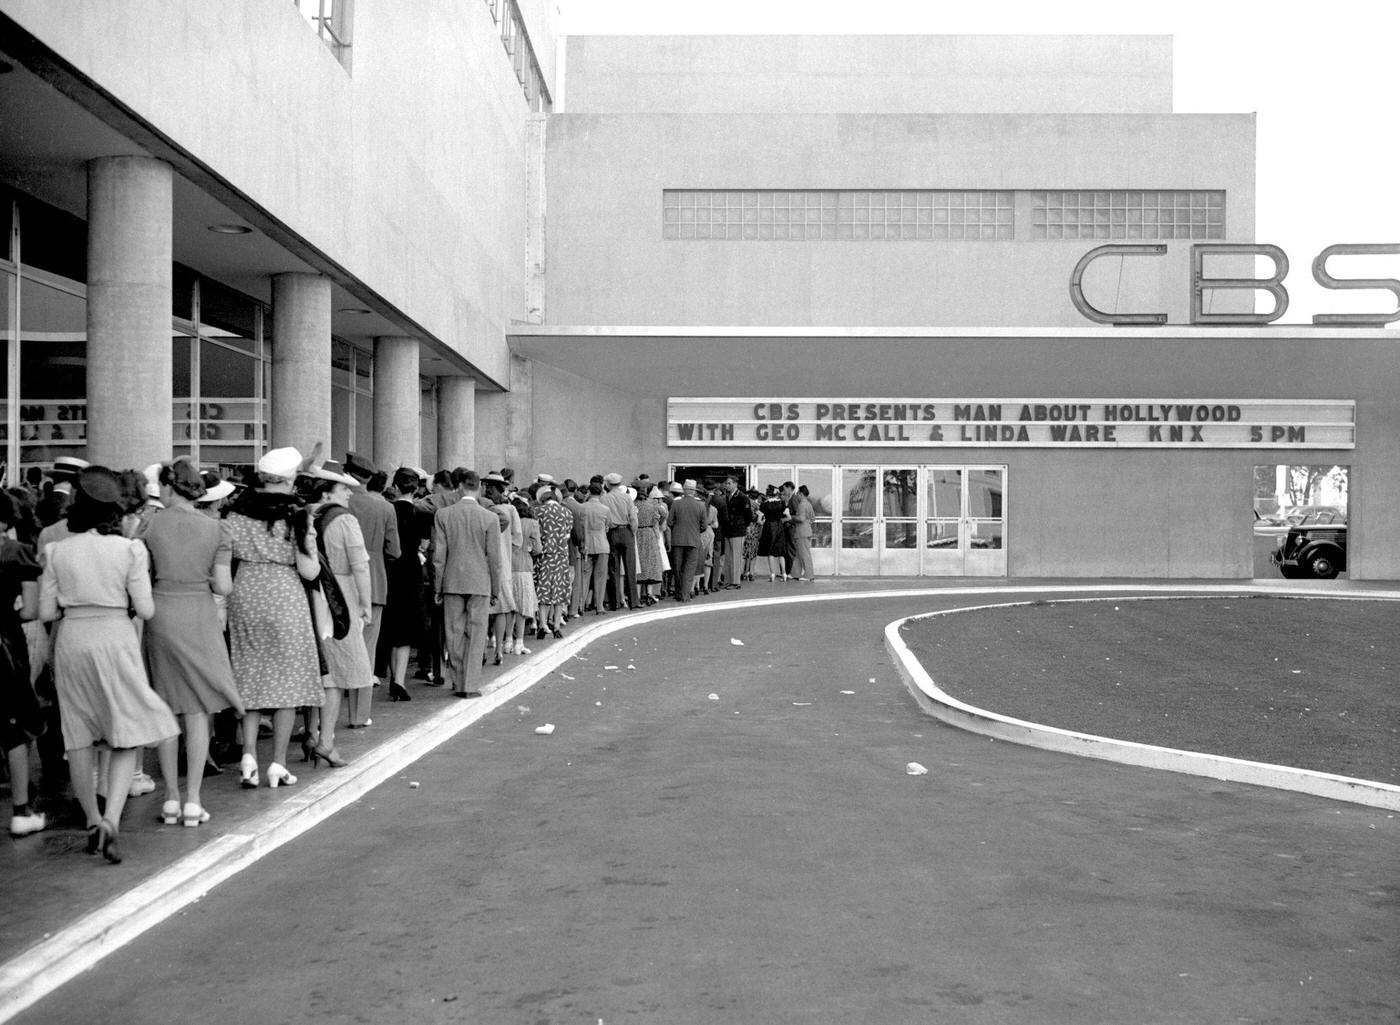 Audience members queue in line to enter the CBS Radio program, Man About Hollywood, which broadcasts from CBS KNX studios at Columbia Square, 1939.